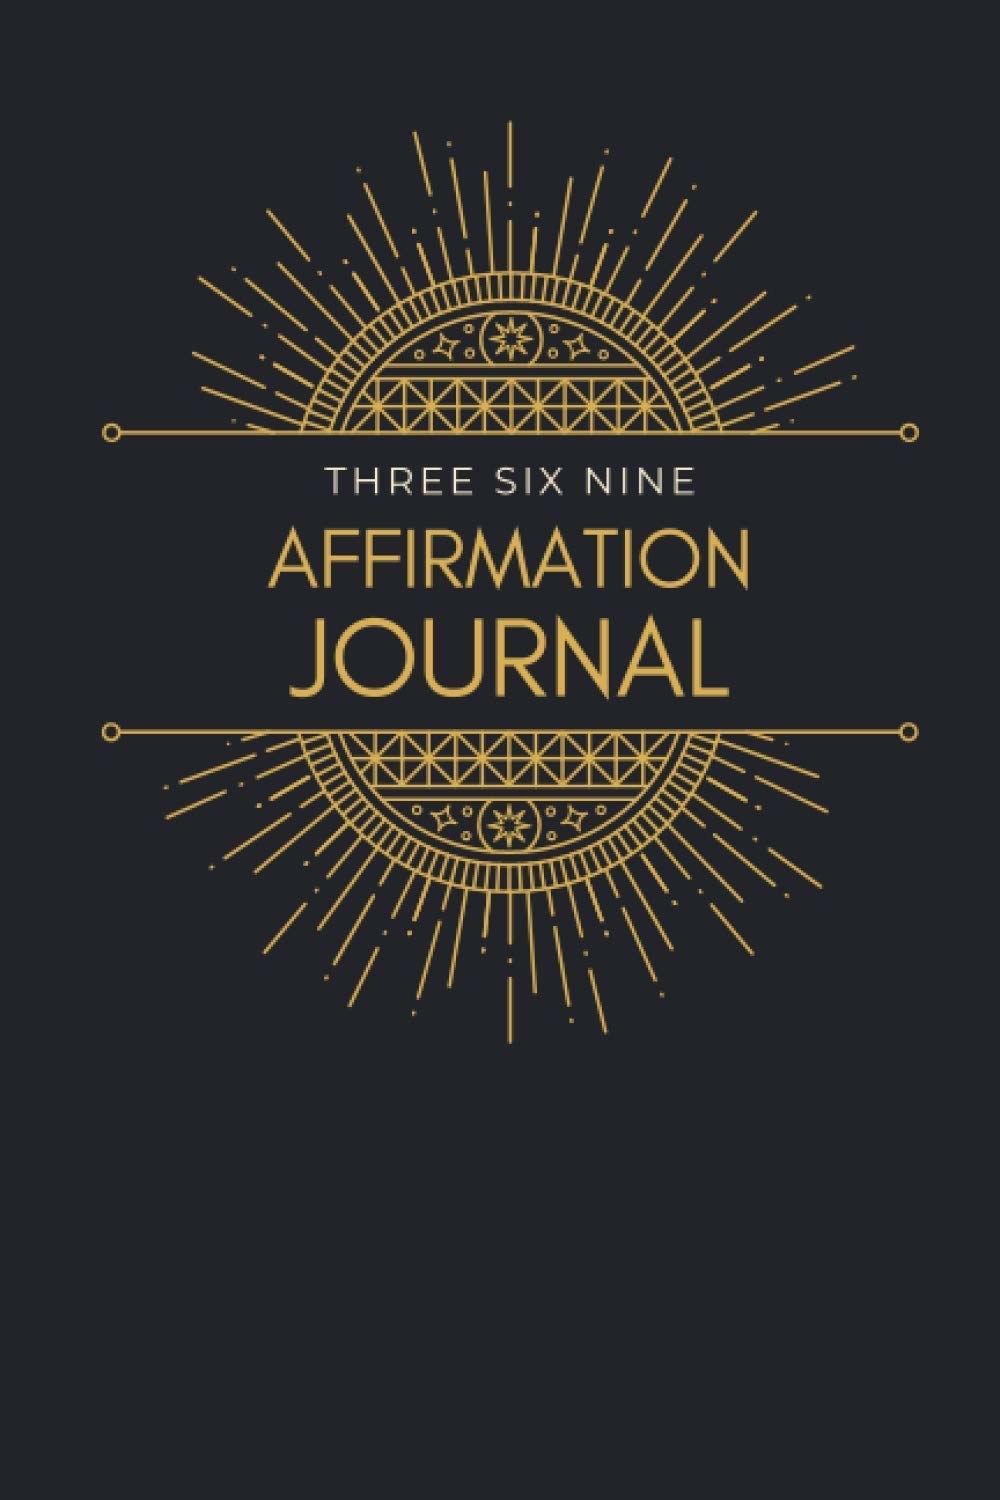 The journal standing up against a plain background